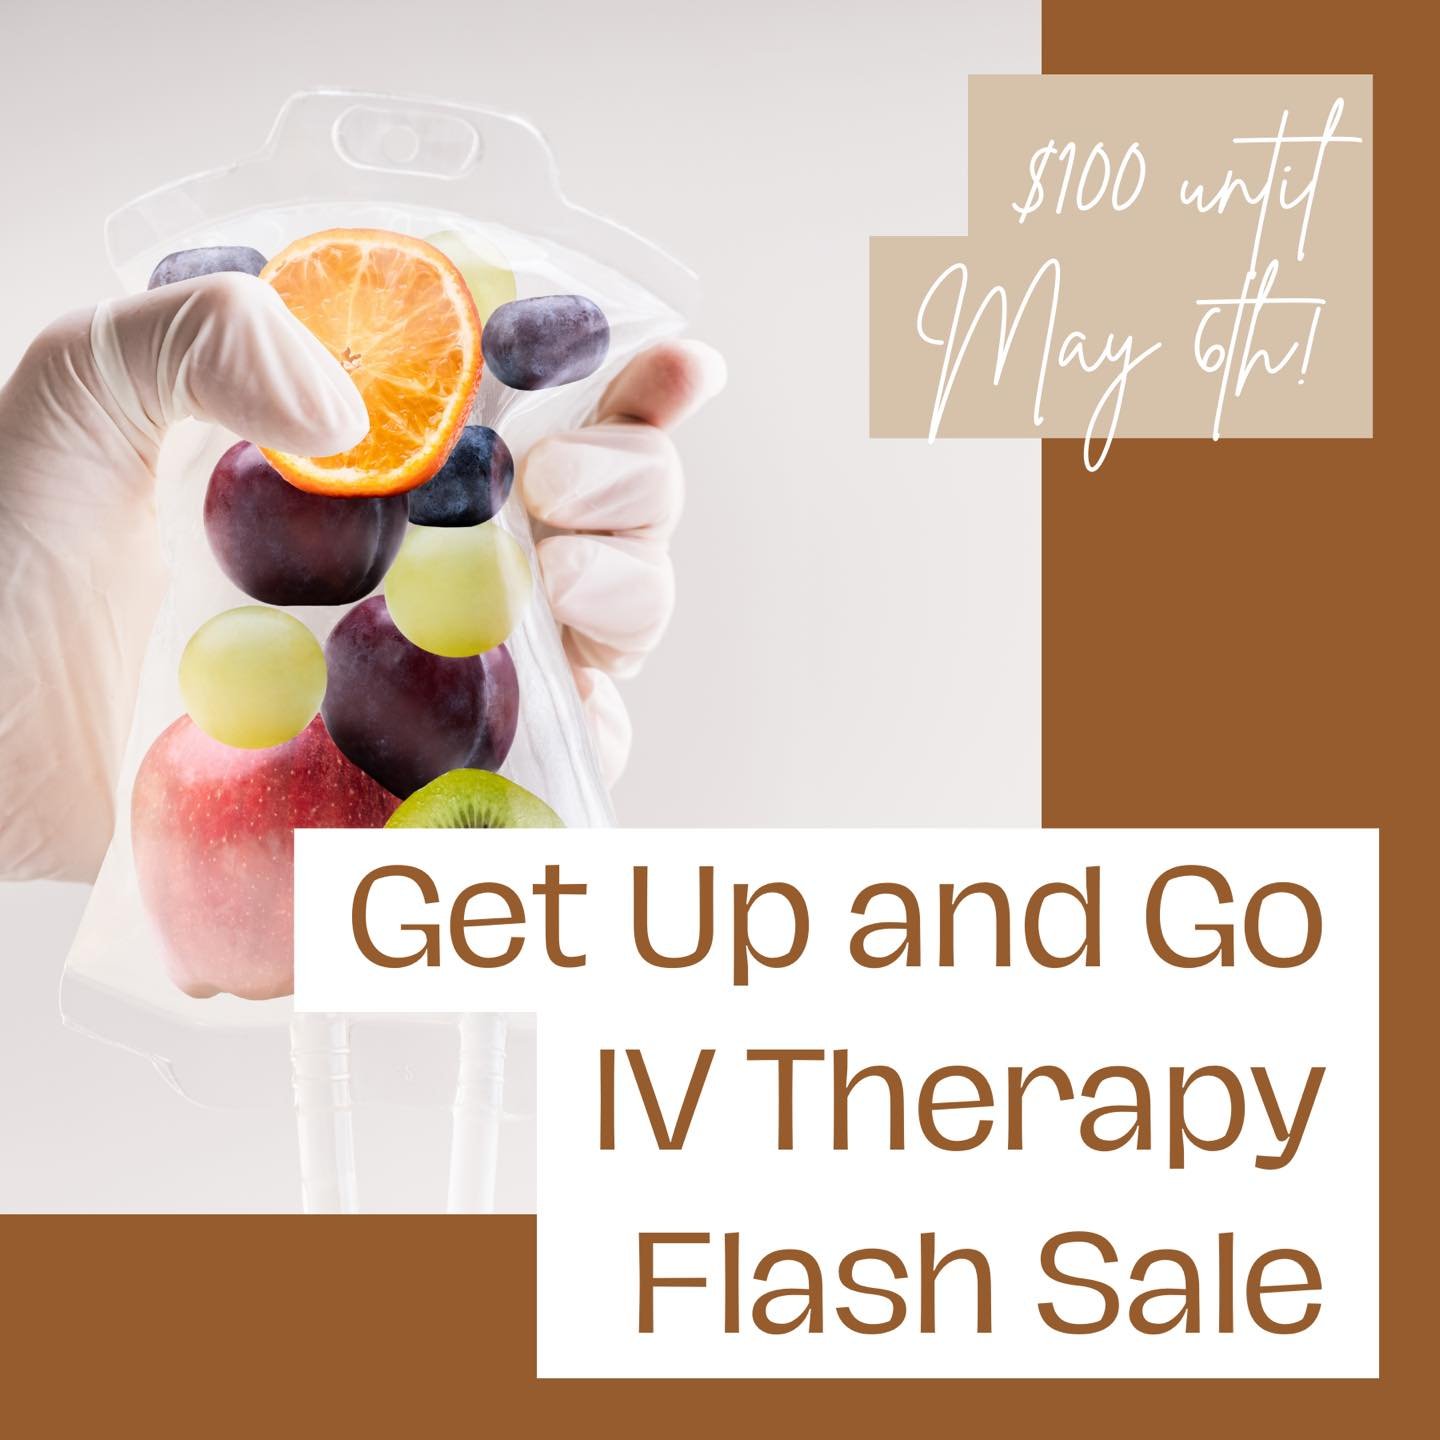 Now&rsquo;s your chance to get replenished and energized with out Get Up and Go IV Therapy flash sale! Now until May 6, this specific IV is only $100 😍

Here are a few of the benefits:
☀️ Helps burn fat
☀️ Restores energy
☀️ Boosts your metabolism
☀